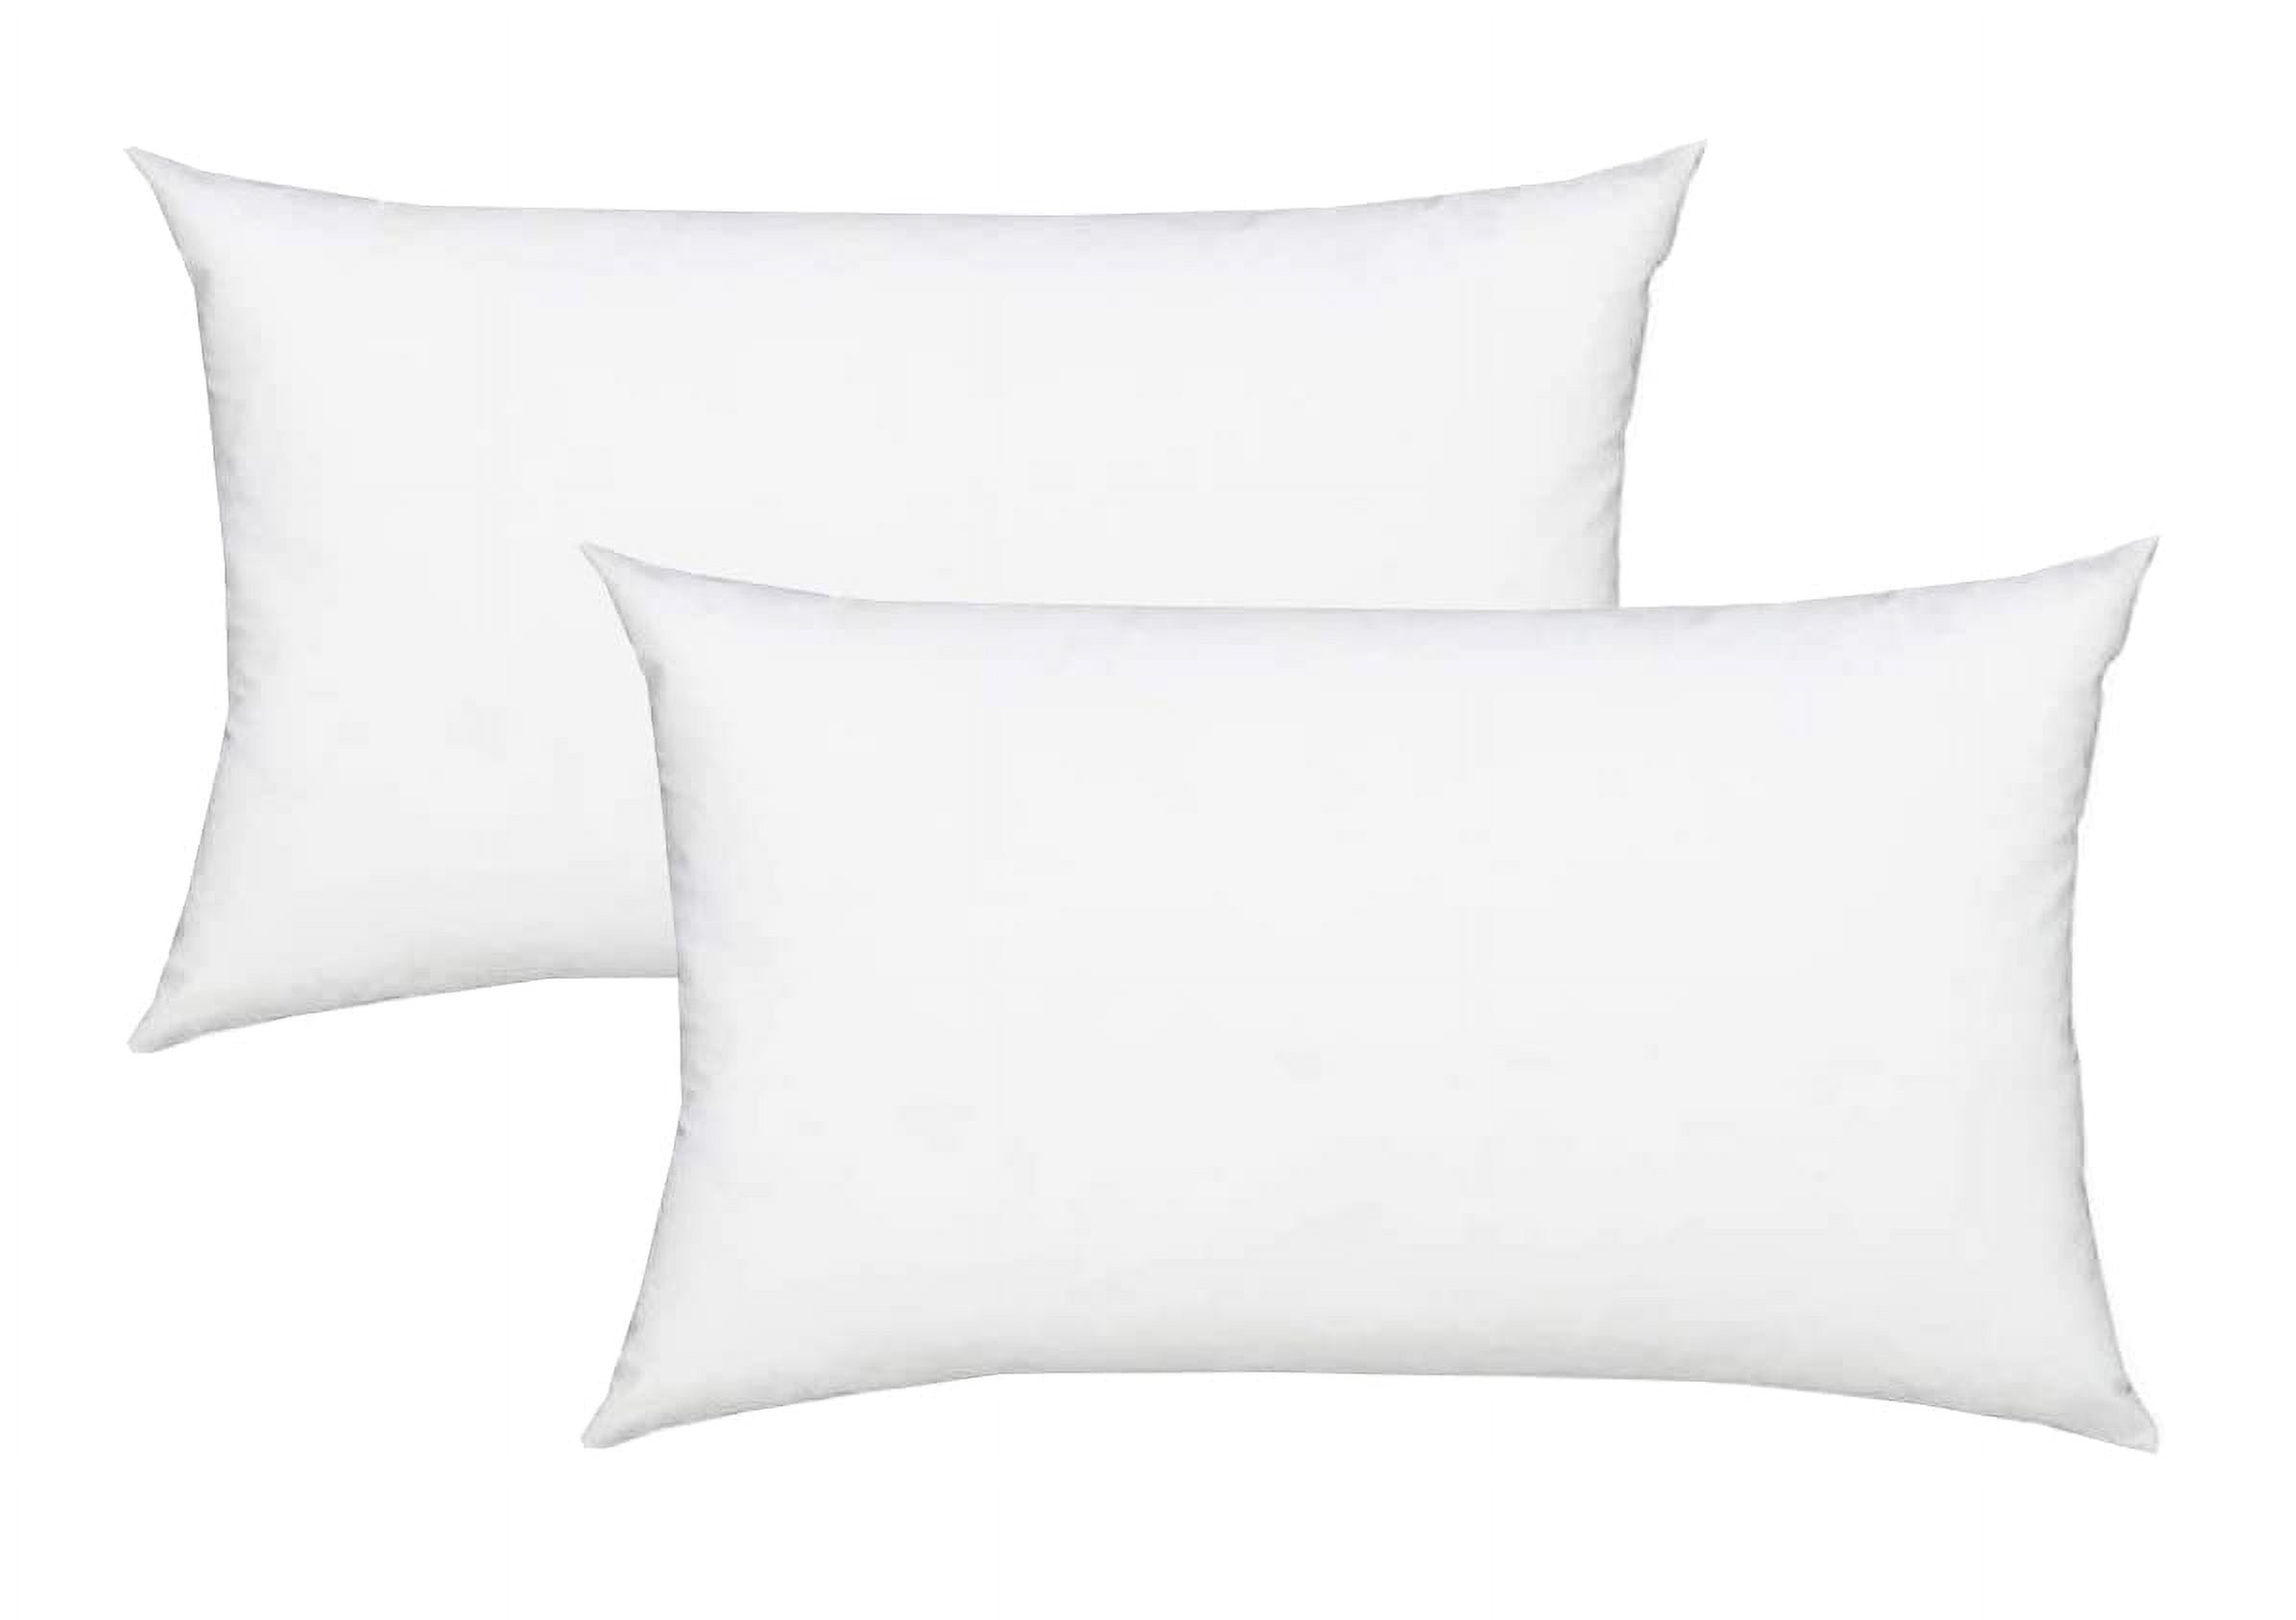  Deconovo 22x22 Pillow Insert, 2 Pack White Couch Pillow Filler,  Soft Fluffy Plump Pillow Sham Stuffer for Throw Pillows, Decorative Bed  Sofa Couch Square Pillow Forms, Sleeper Pillows for Adults 